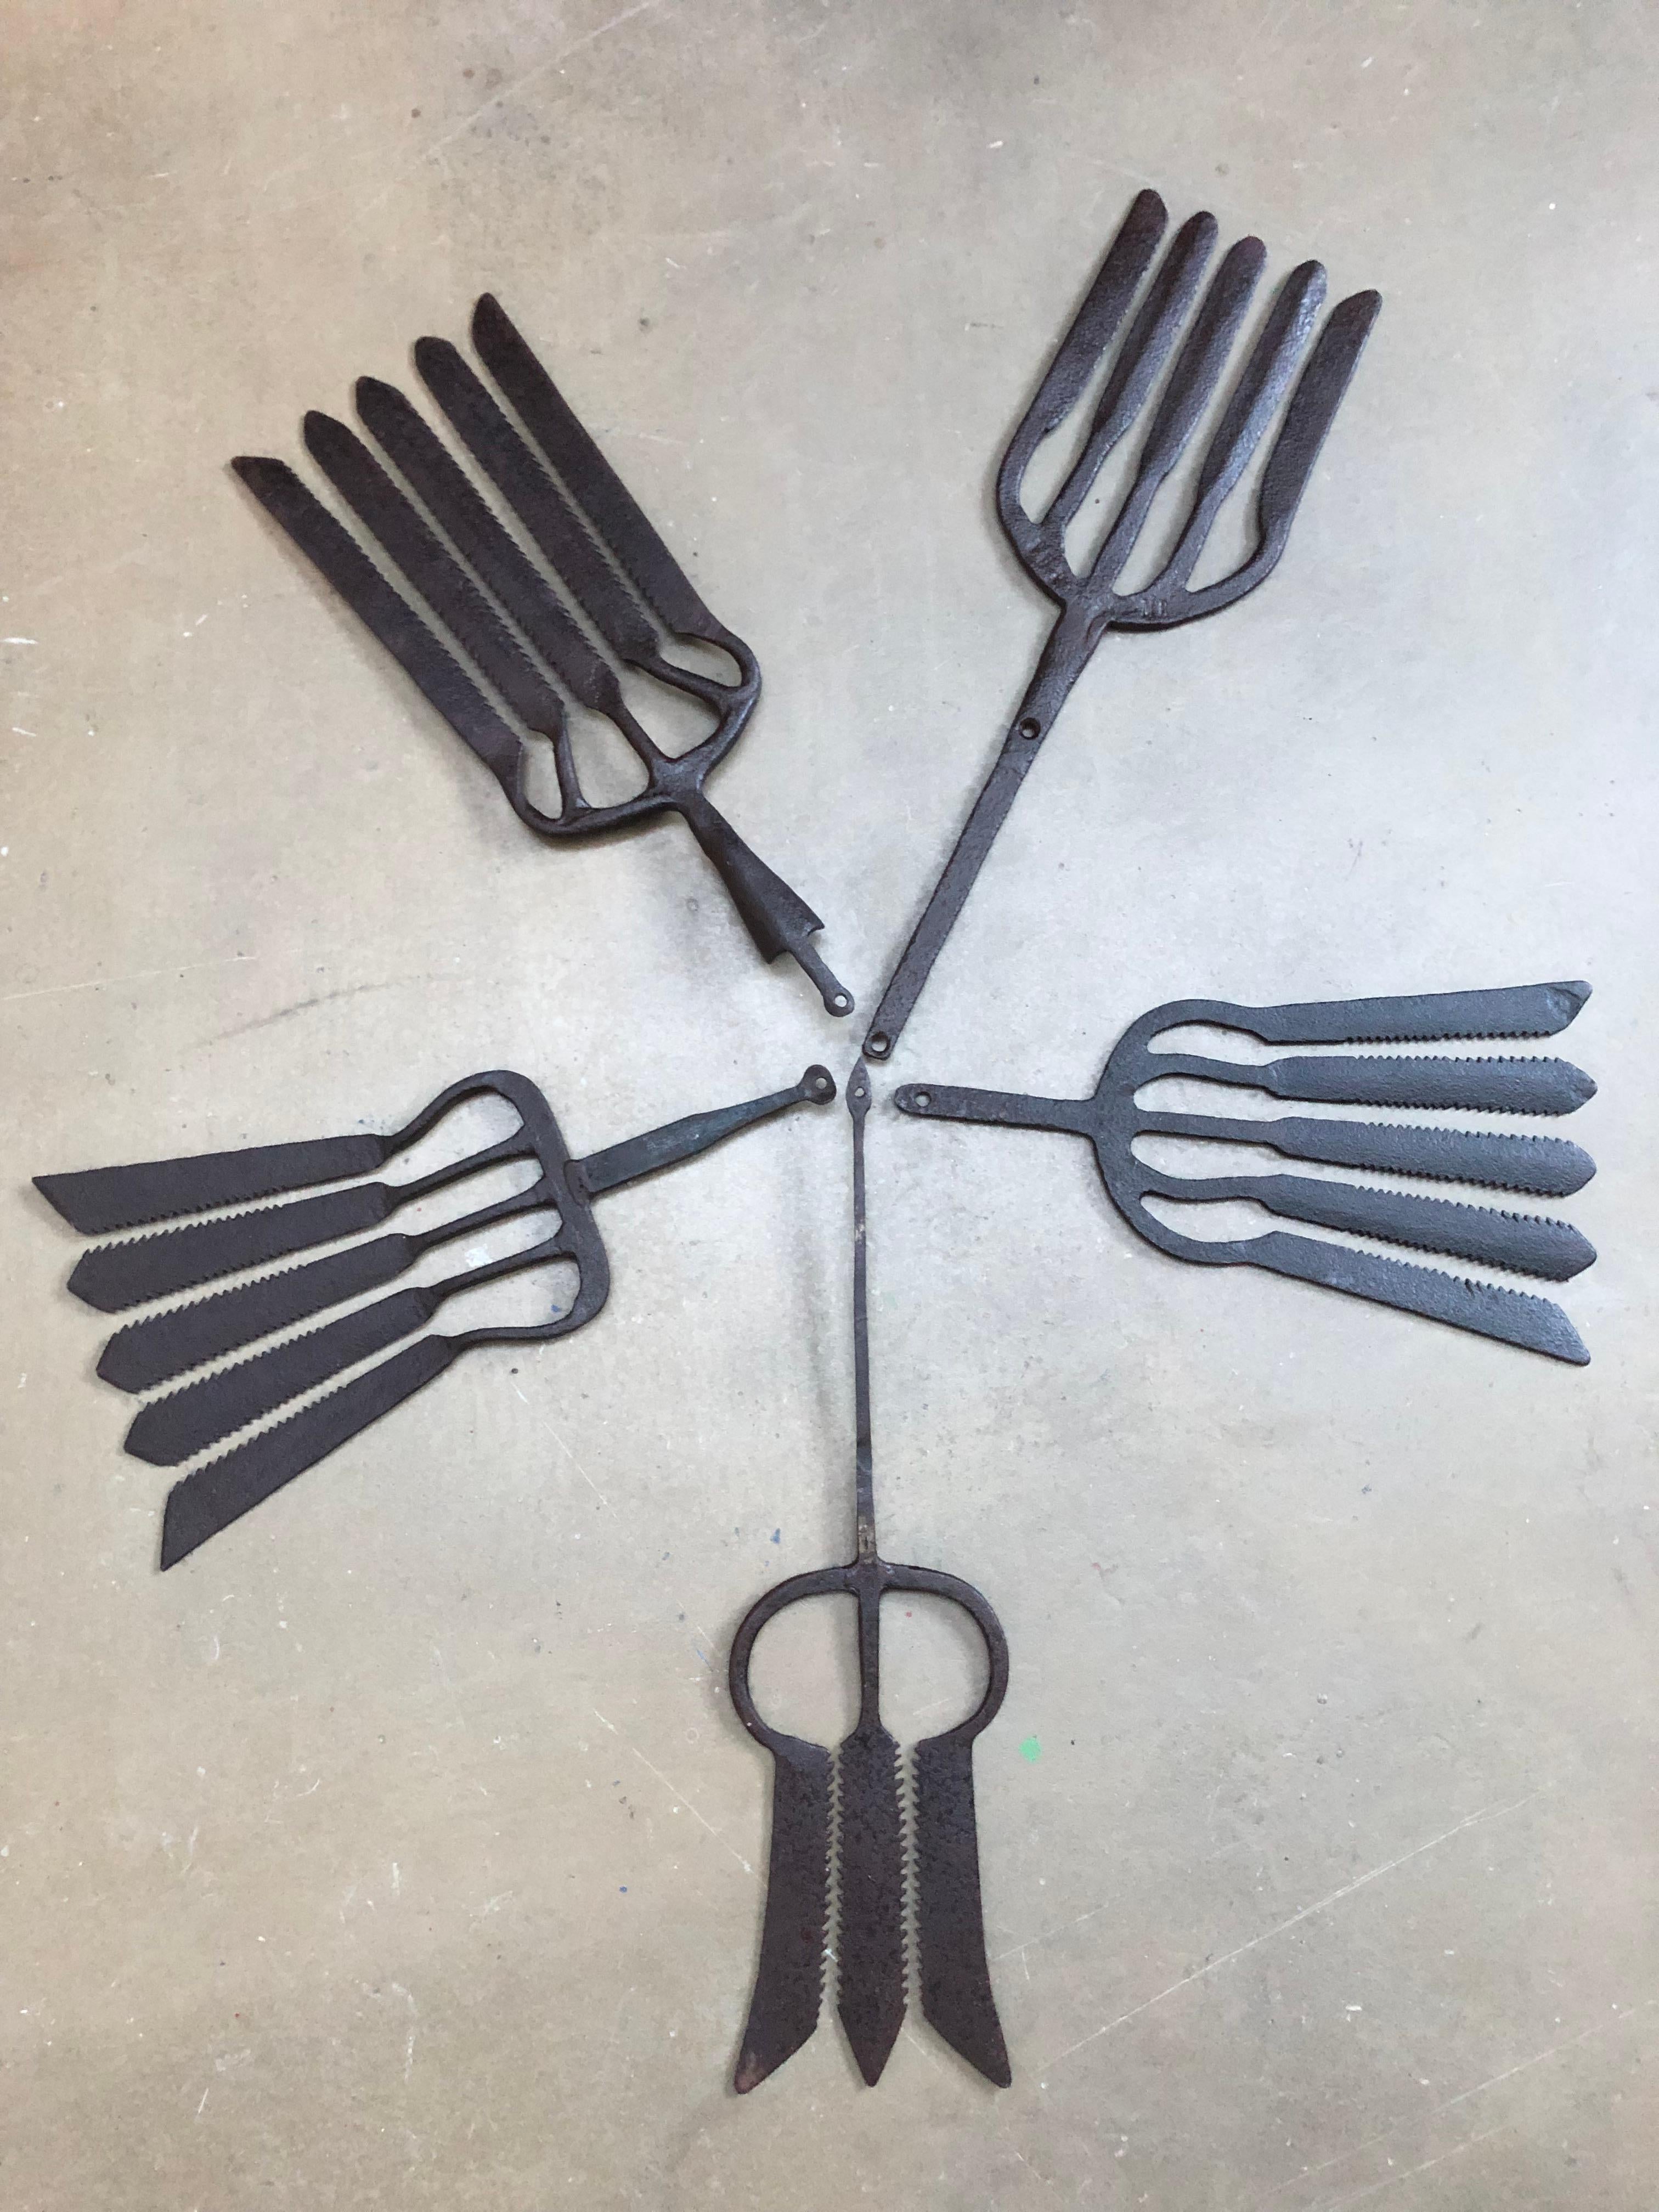 A collection of 5 wrought iron eel forks from the 18th century. 
Extremely decorative and each one unique. 
Each one is a work of art. 
Sizes vary from 52 cm to 37 cm. 
Would look amazing in a fish restaurant, bar, club or even in your home.
In 2009